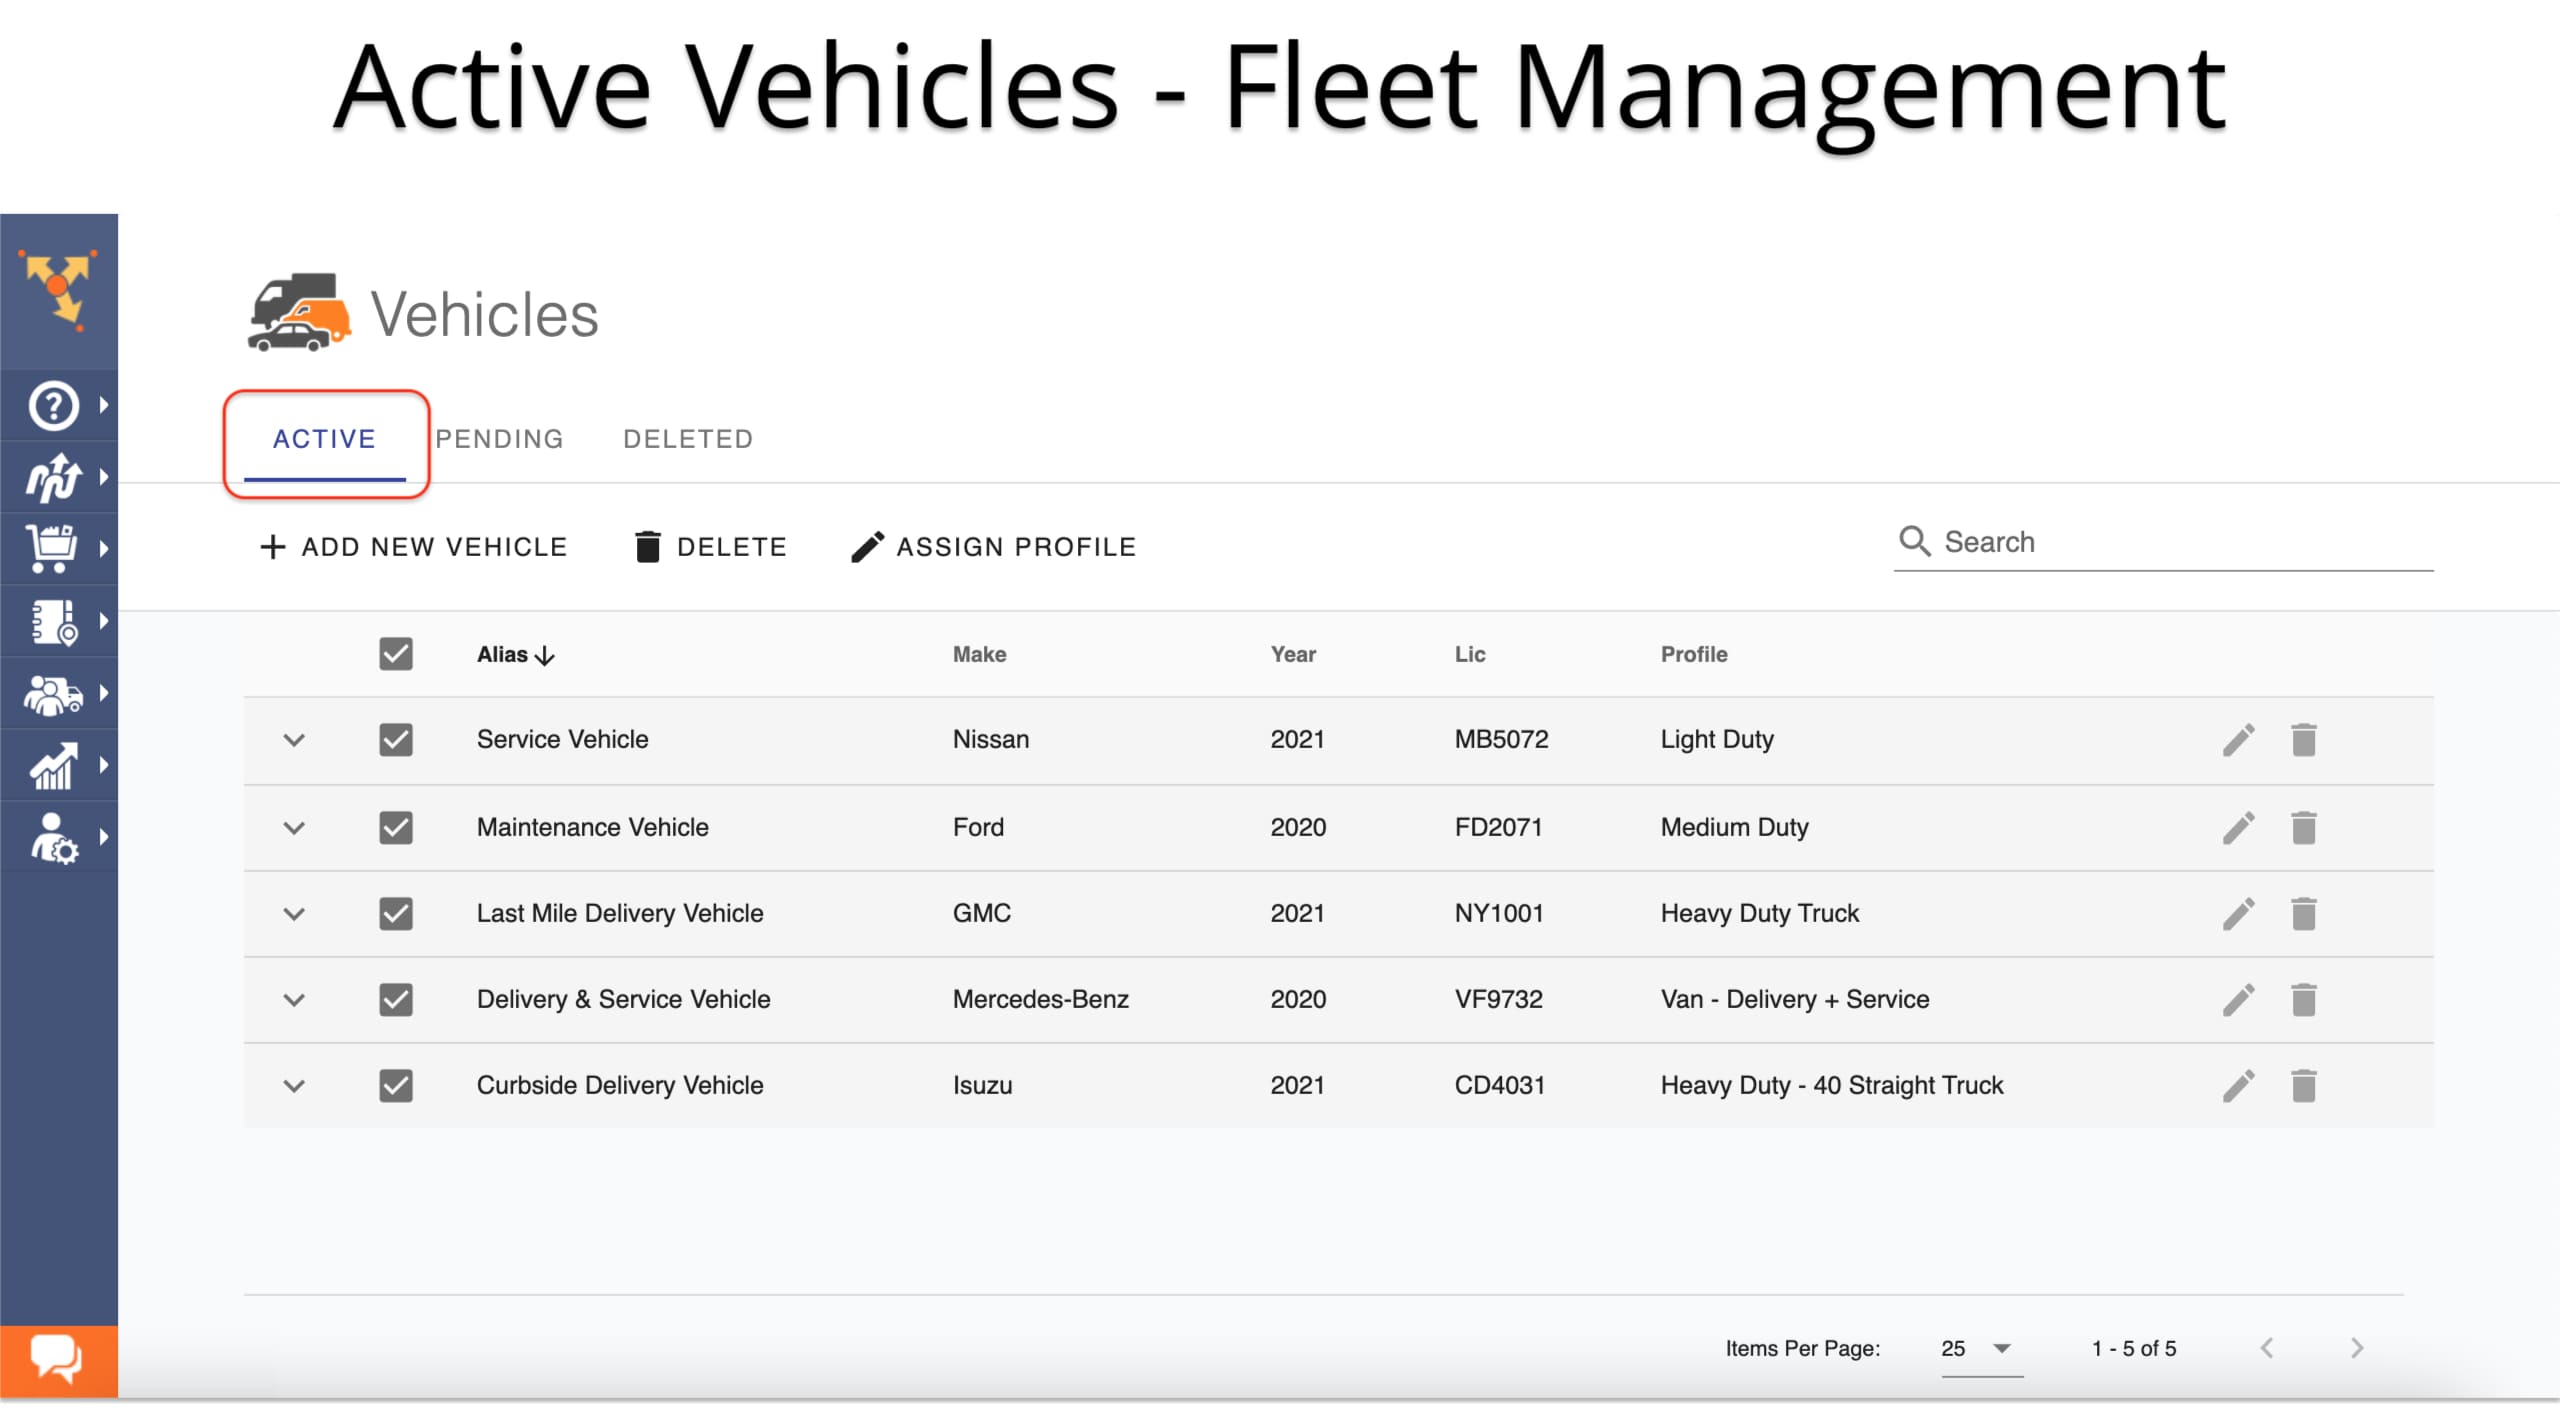 Assign active vehicles to routes, edit vehicle parameters, and use fleet management features.